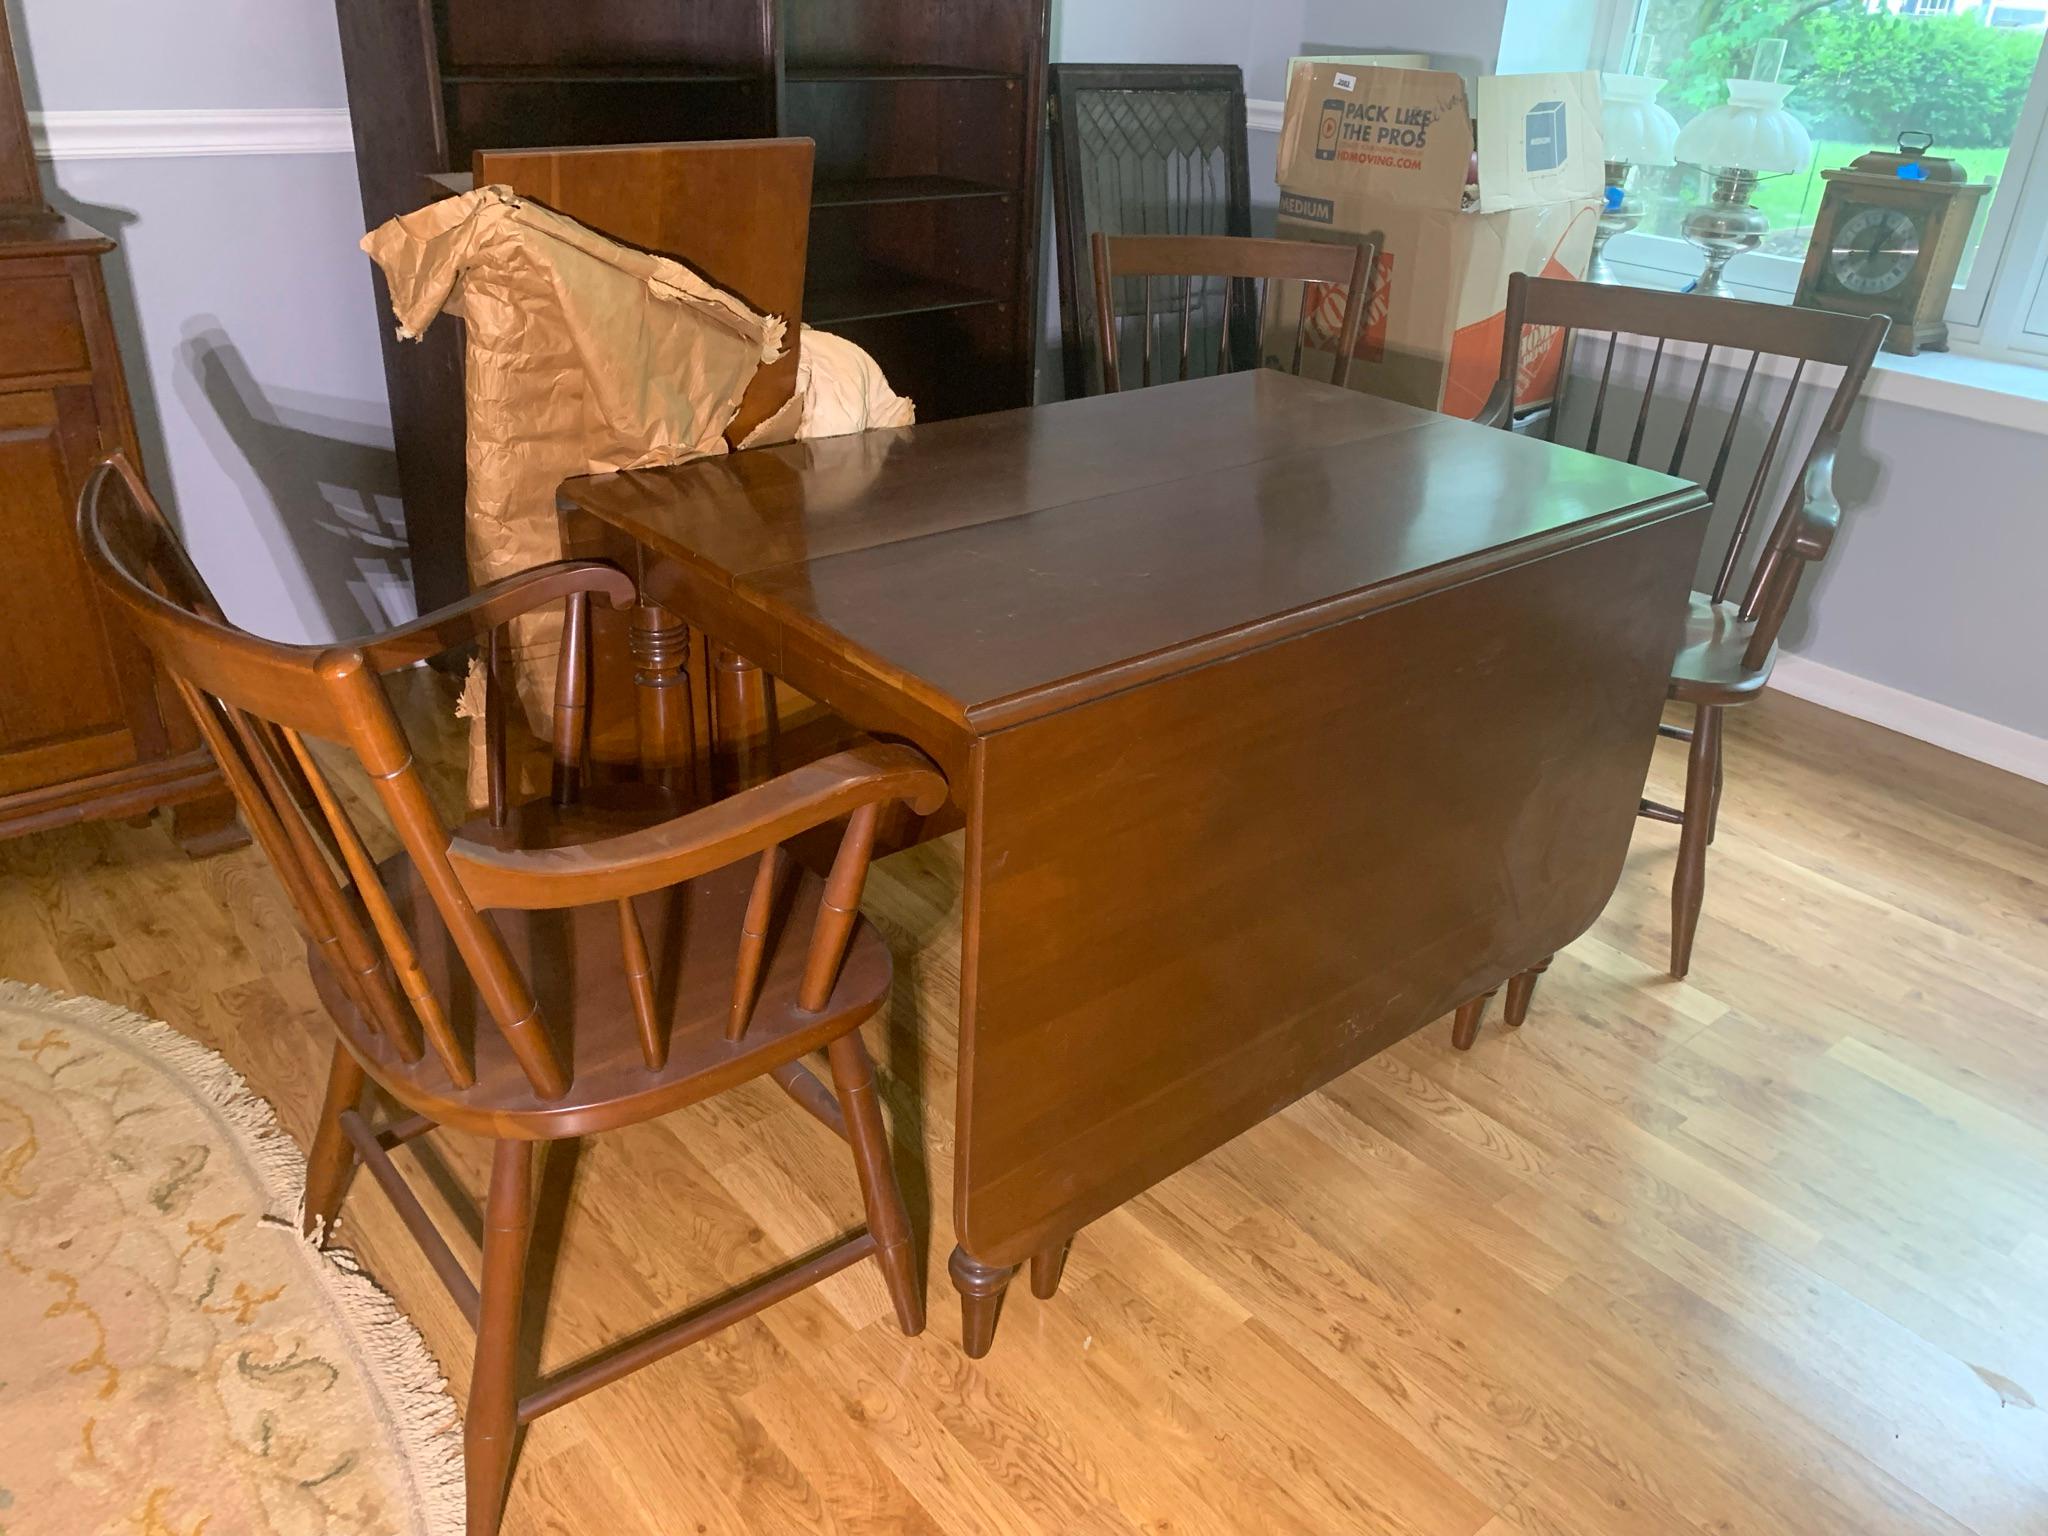 Gorgeous Willett Drop Leaf Table with Extra Leaf & 3 Chairs - Cherry Wood